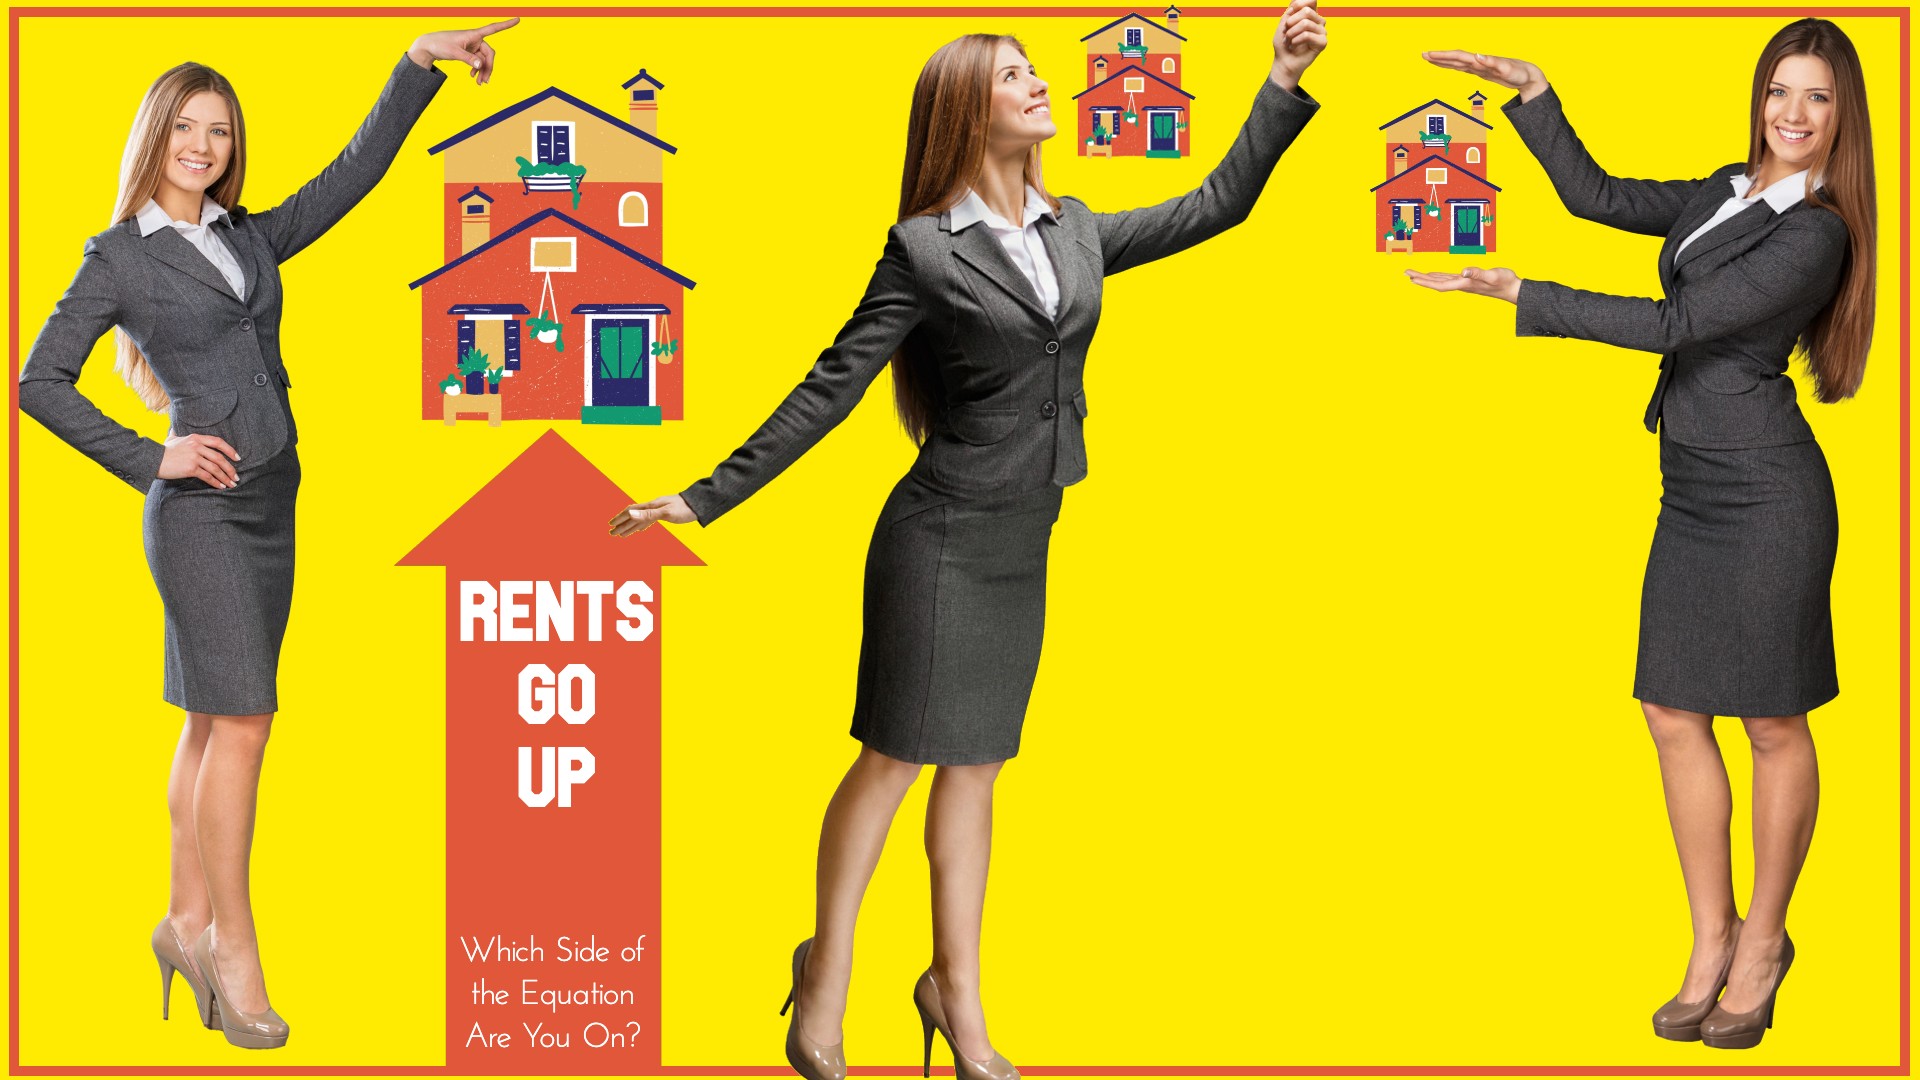 Rents Go Up: Which Side of the Equation Are You On?